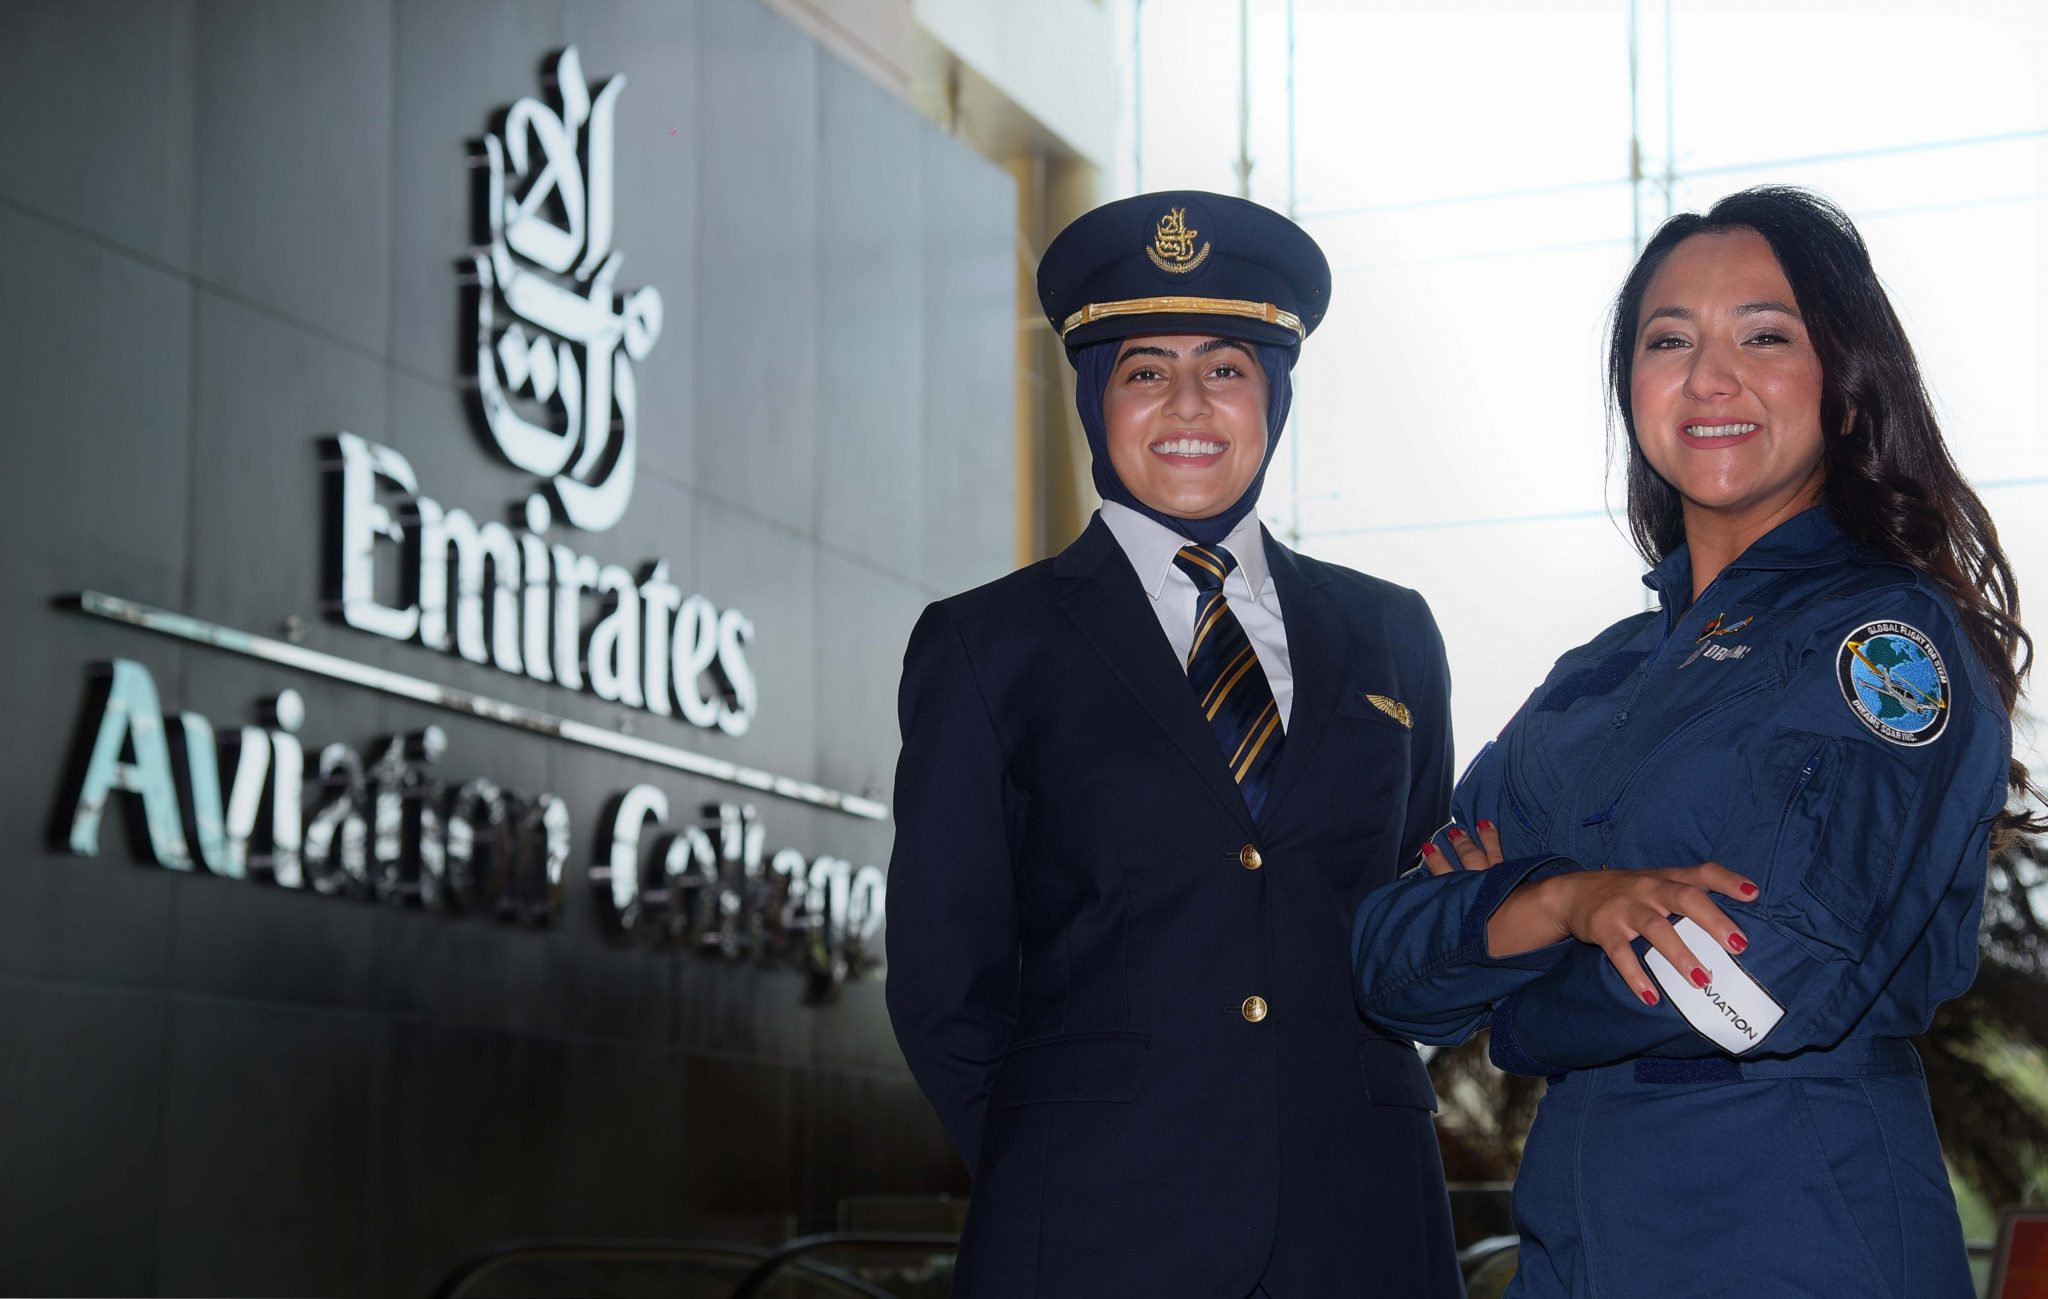 Etihad Airways and Emirates Are Championing the Important Role of Women in the Aviation Industry